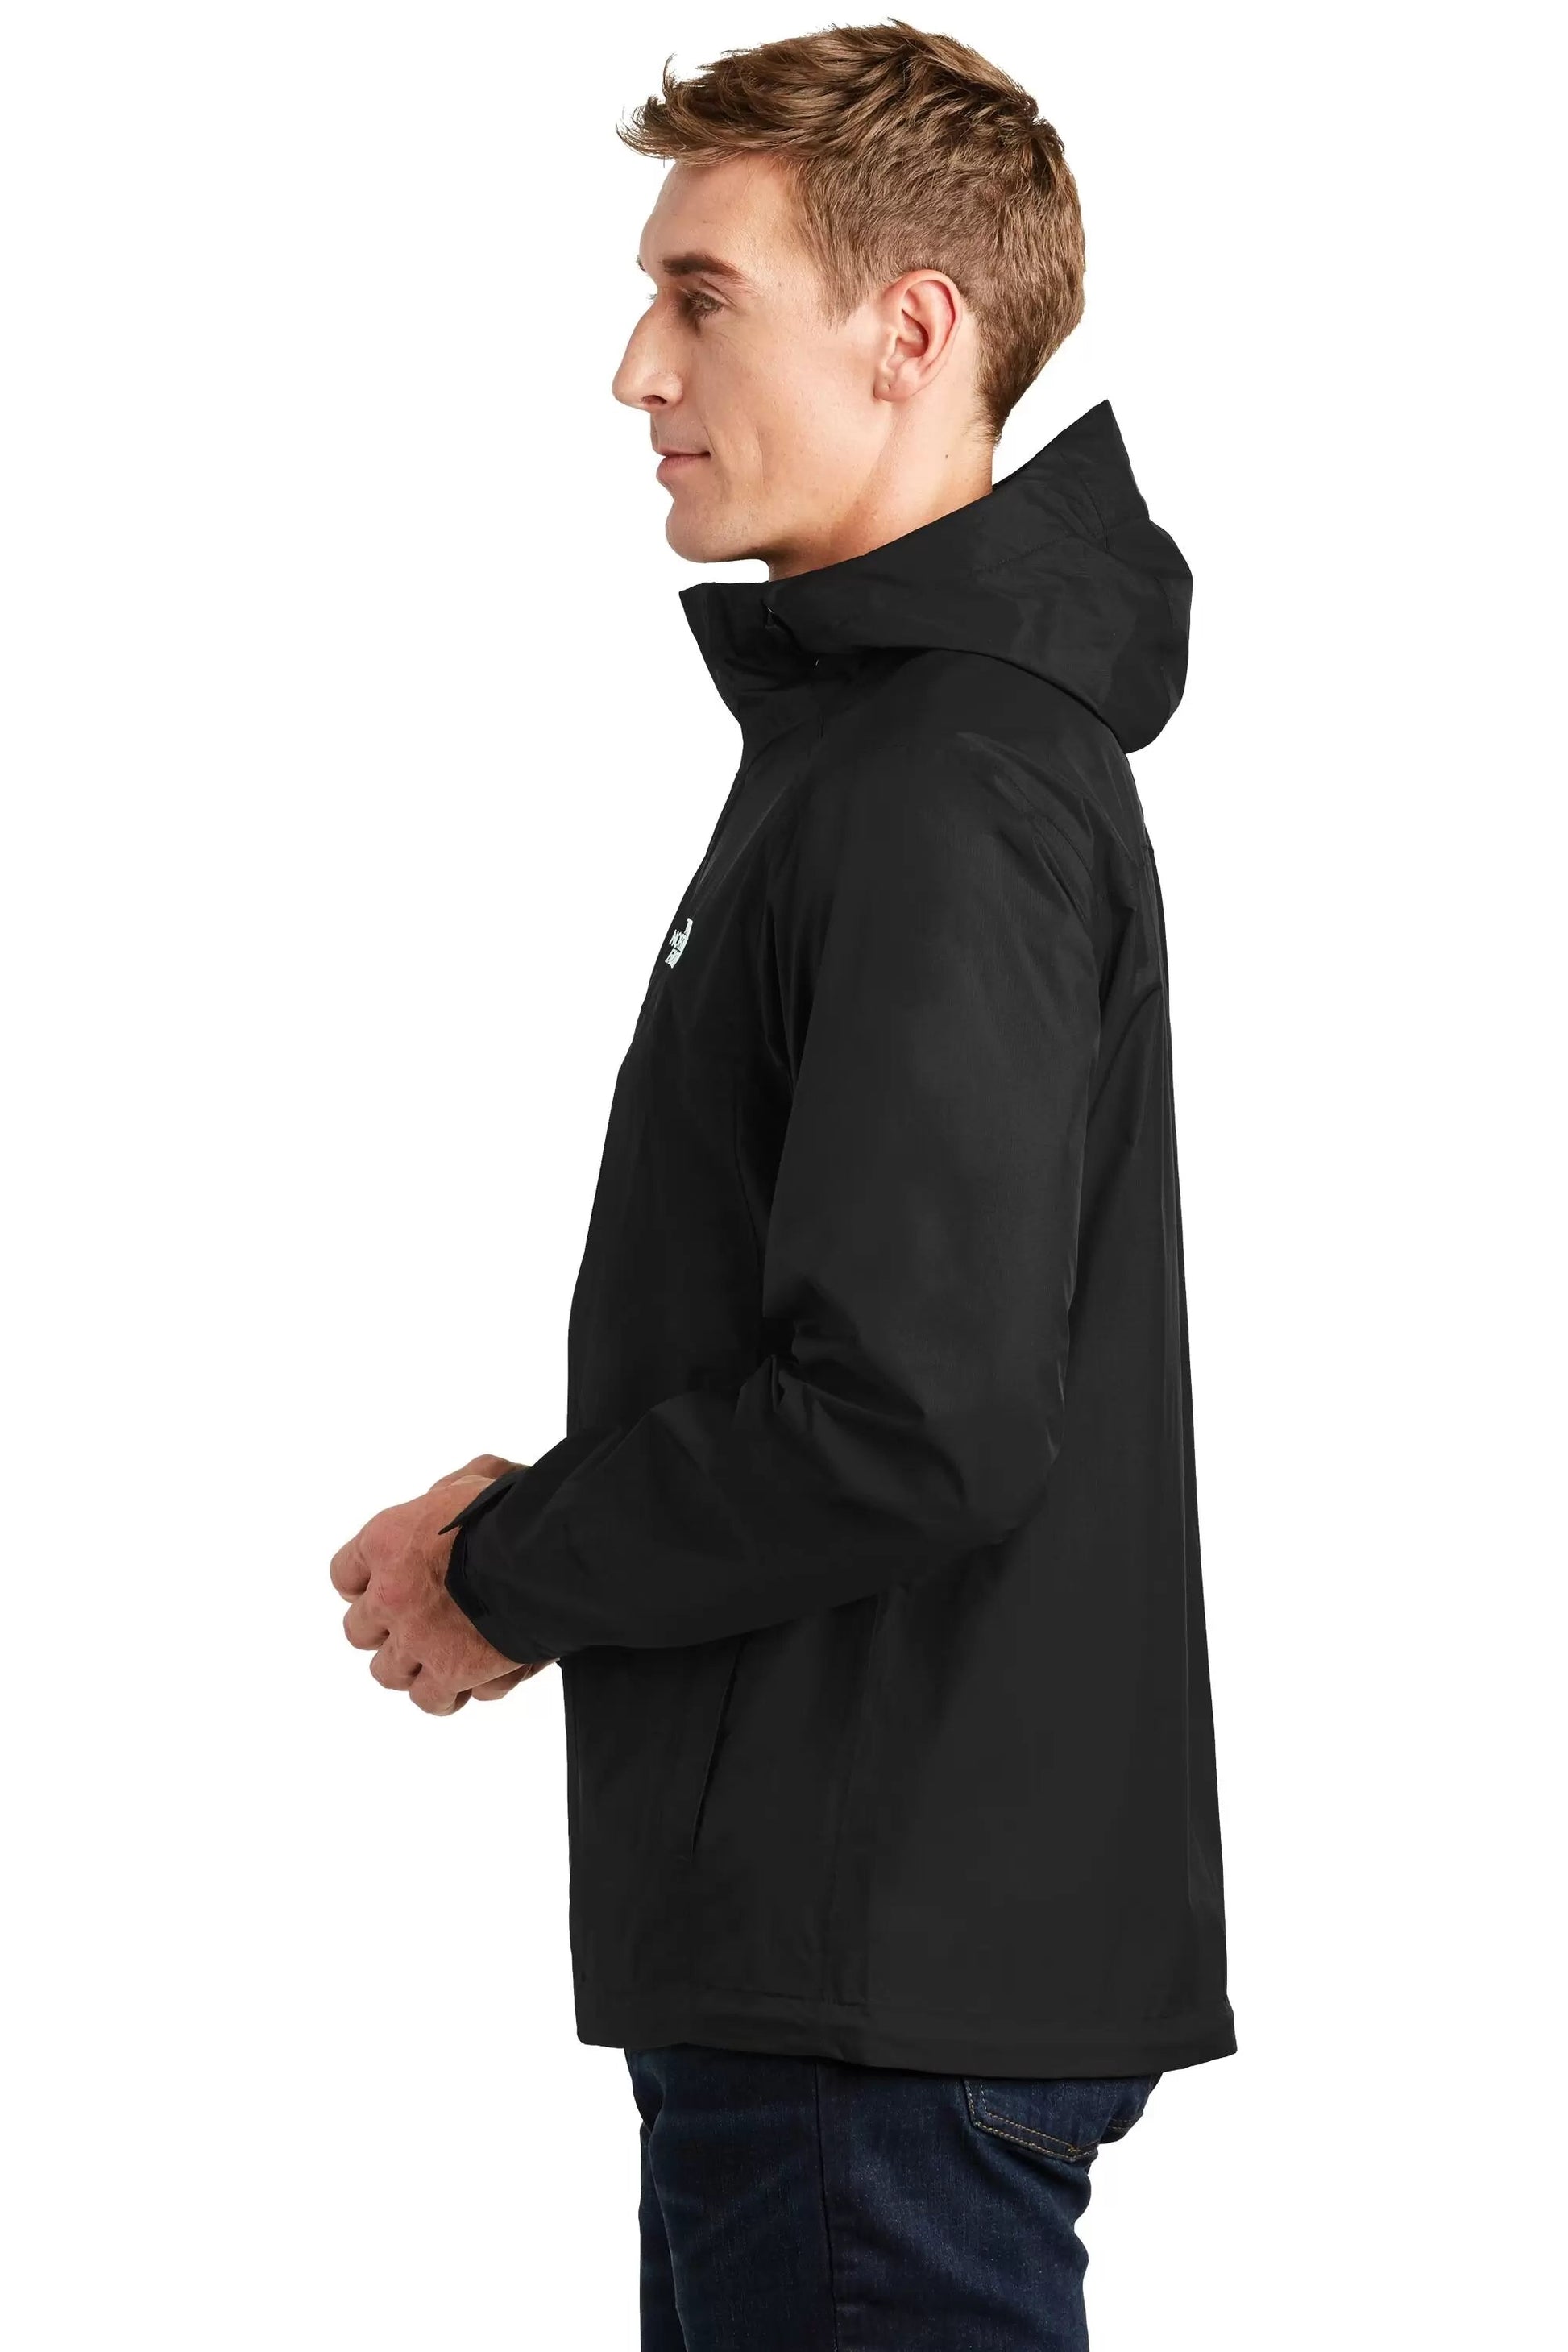 THE NORTH FACE® DRYVENT™ RAIN JACKET